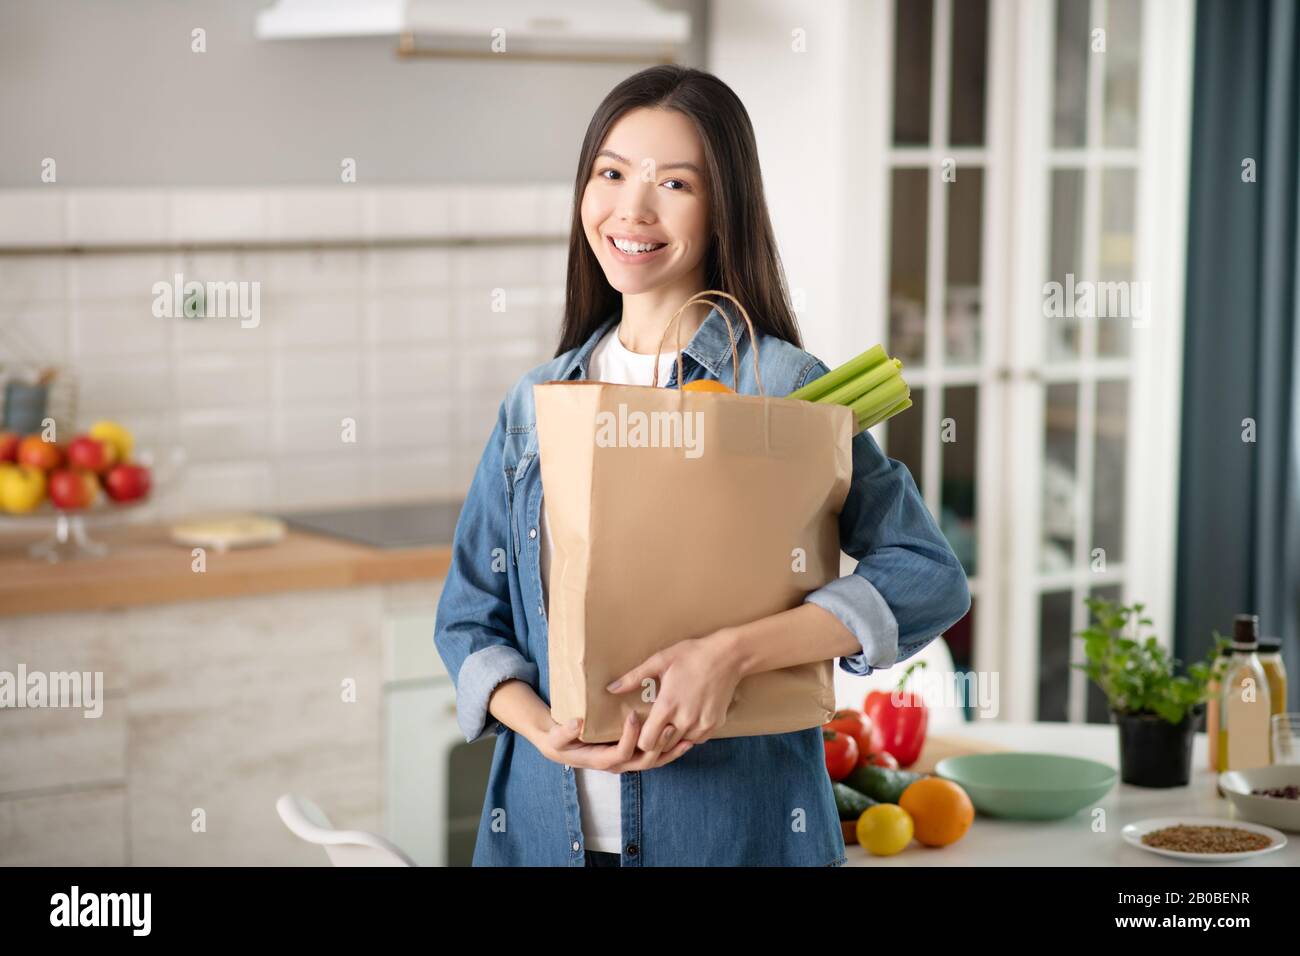 Young pretty woman standing in kitchen with an ecological bag. Stock Photo